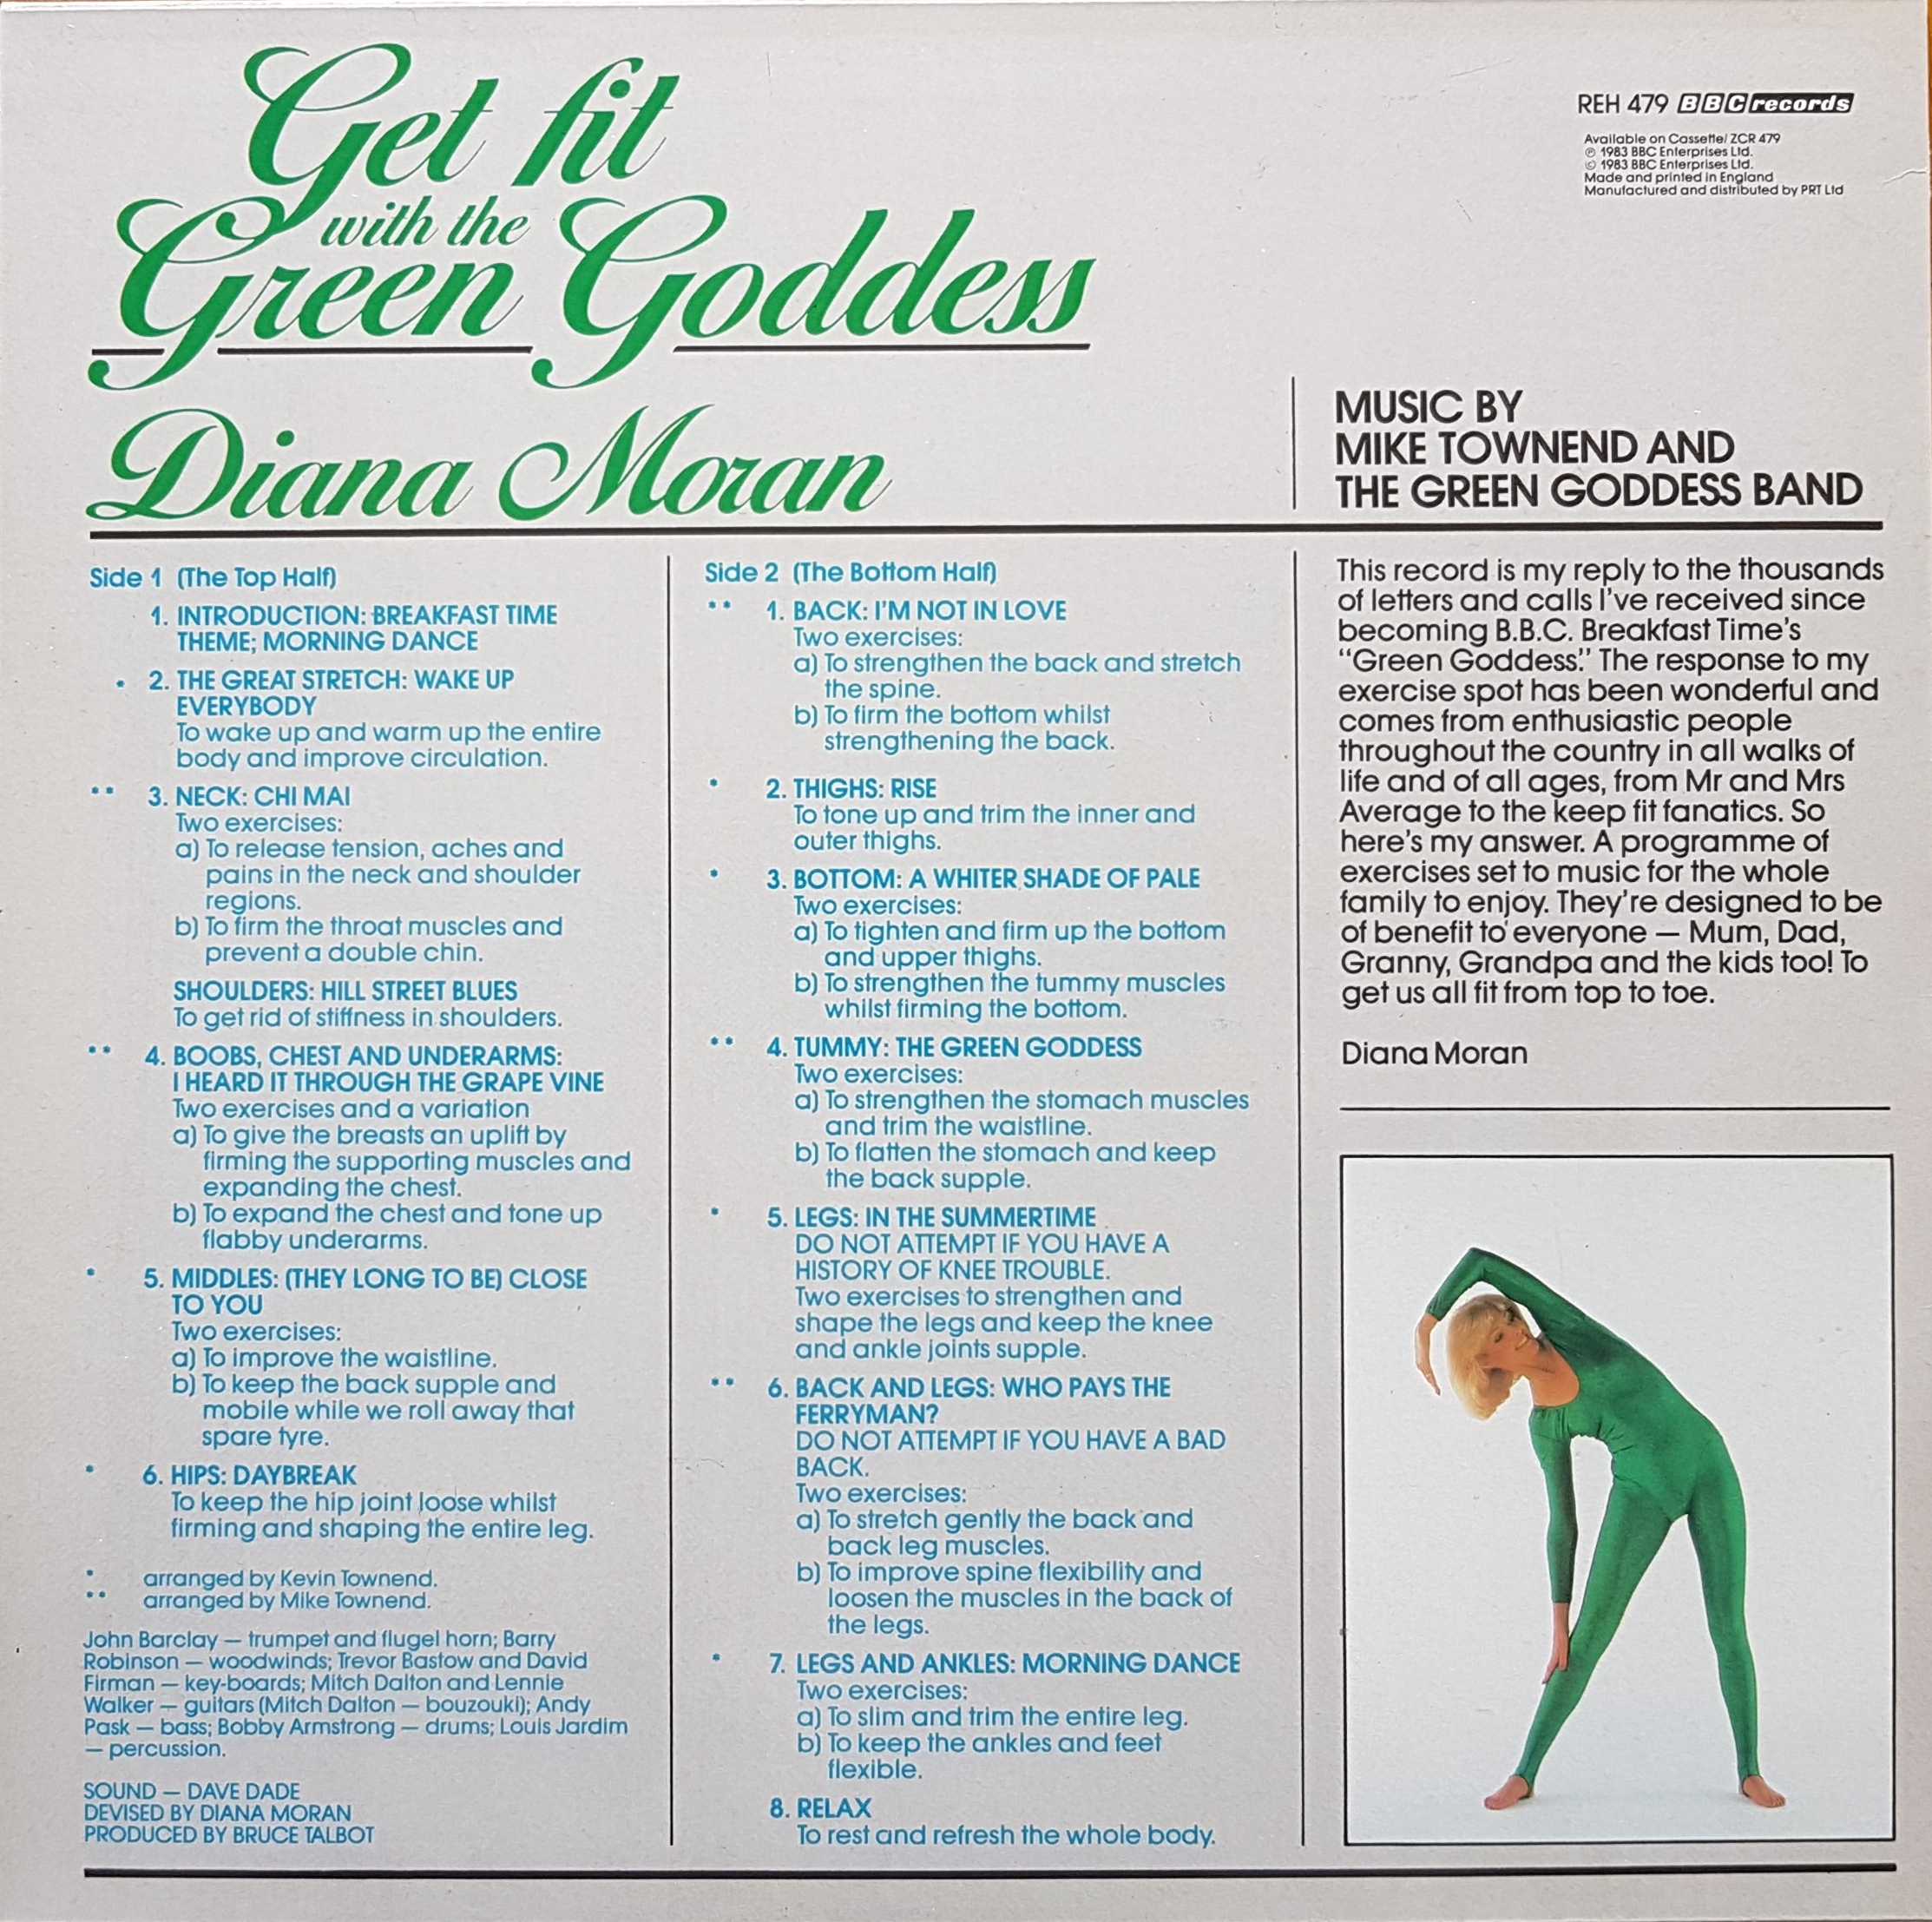 Picture of REH 479 Get fit with the green goddess by artist Diana Moran from the BBC records and Tapes library